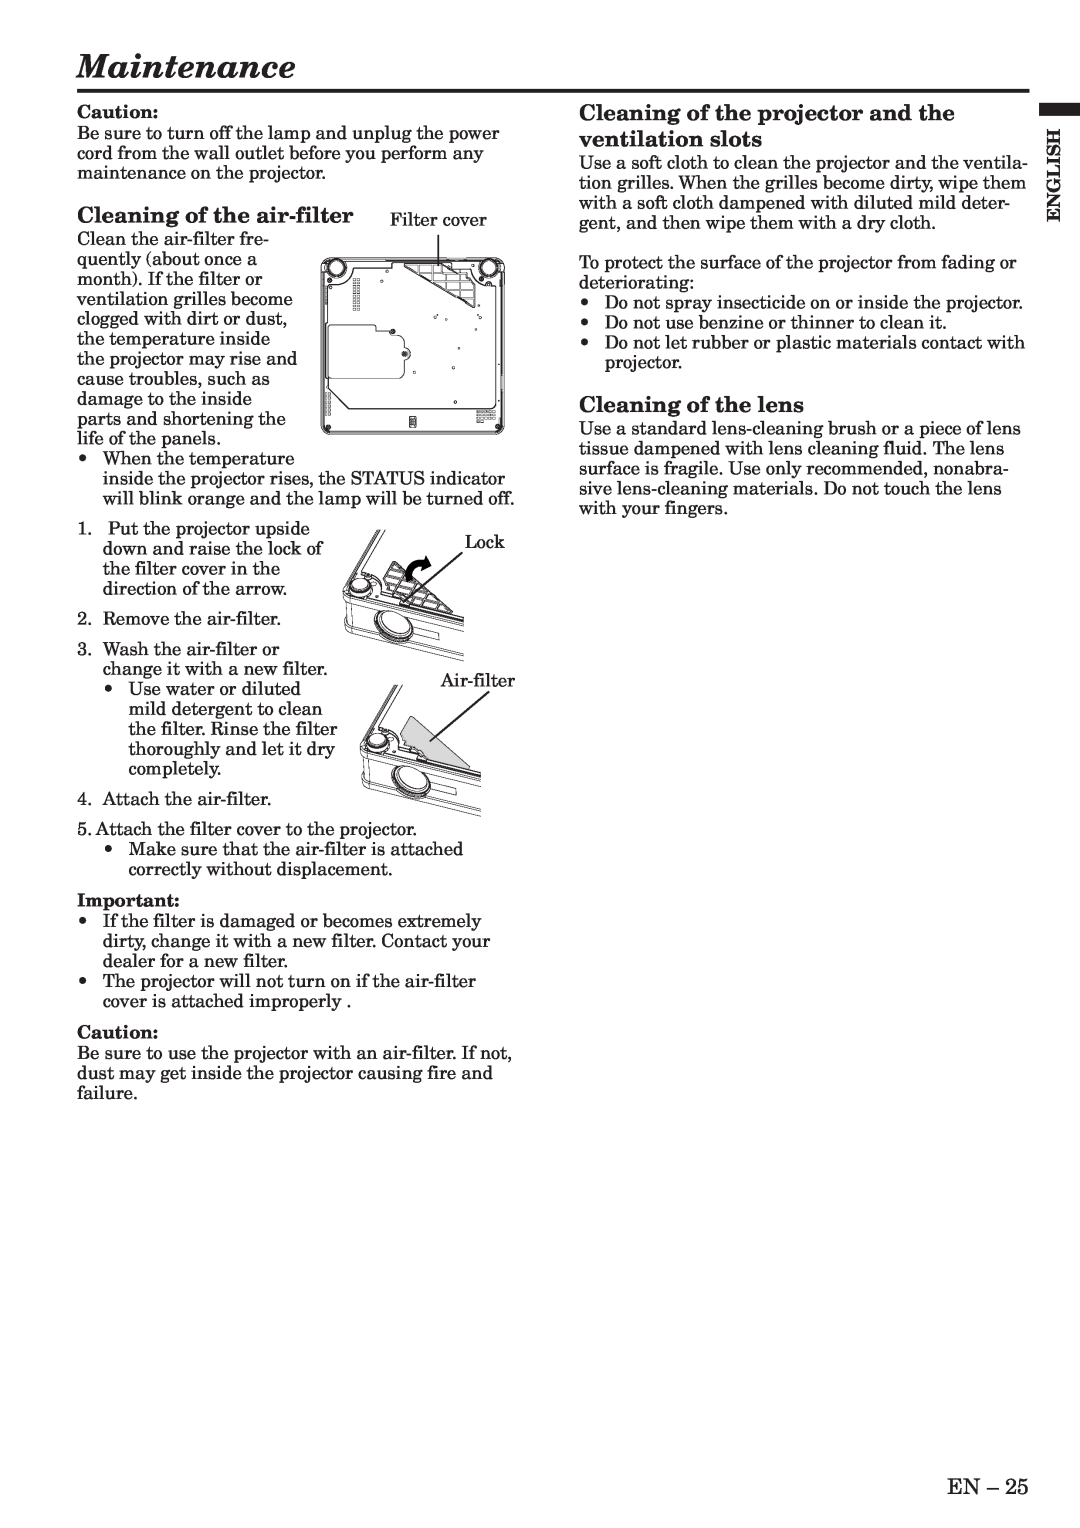 Mitsubishi Electronics XL5U user manual Maintenance, Cleaning of the air-filter Filter cover, Cleaning of the lens, English 